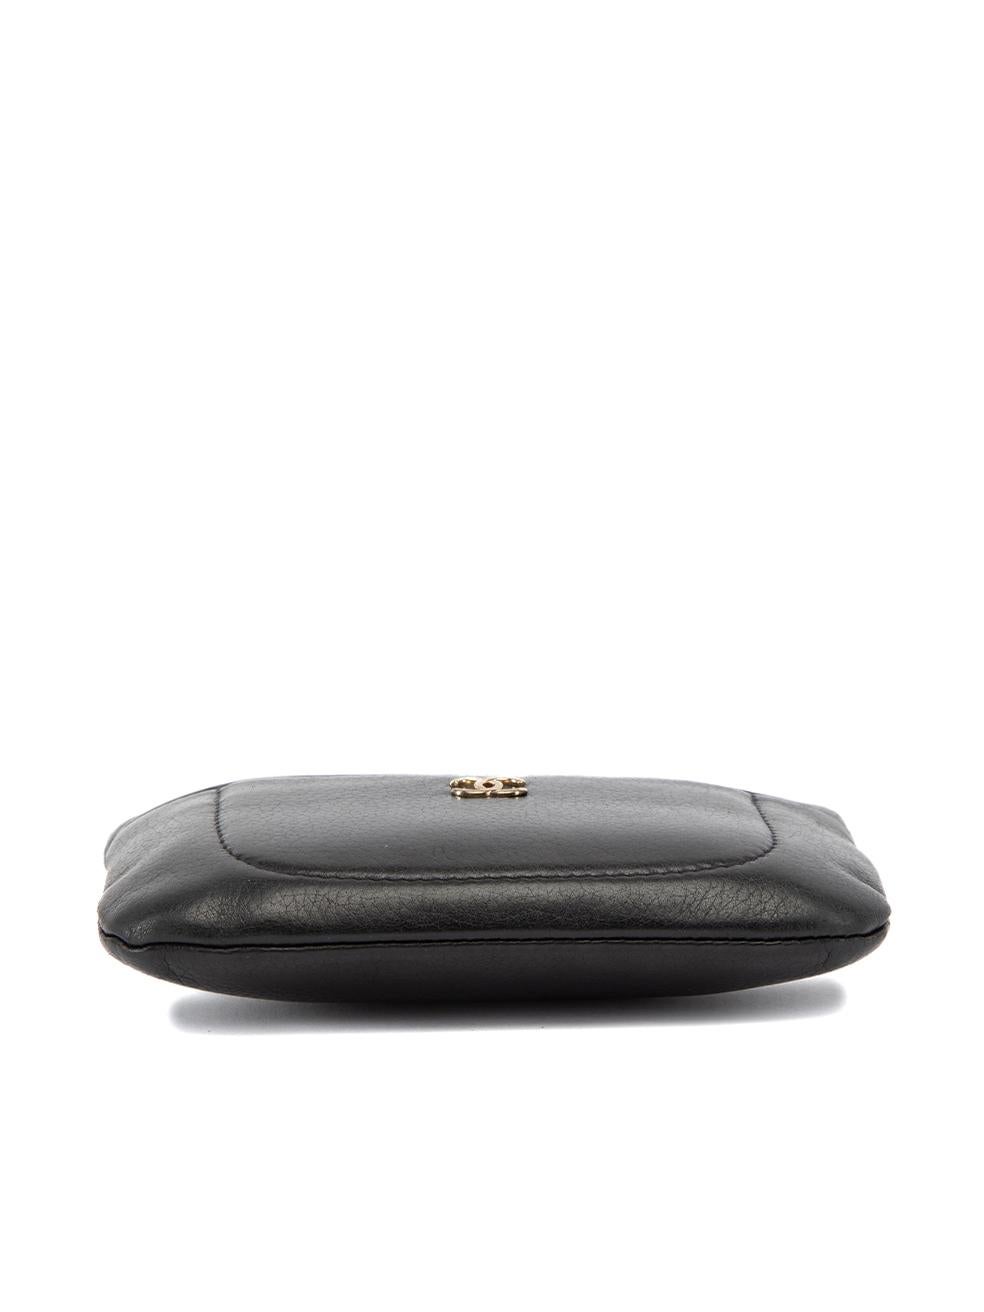 Chanel Women's Black Leather CC Zip Top Coin Purse 1